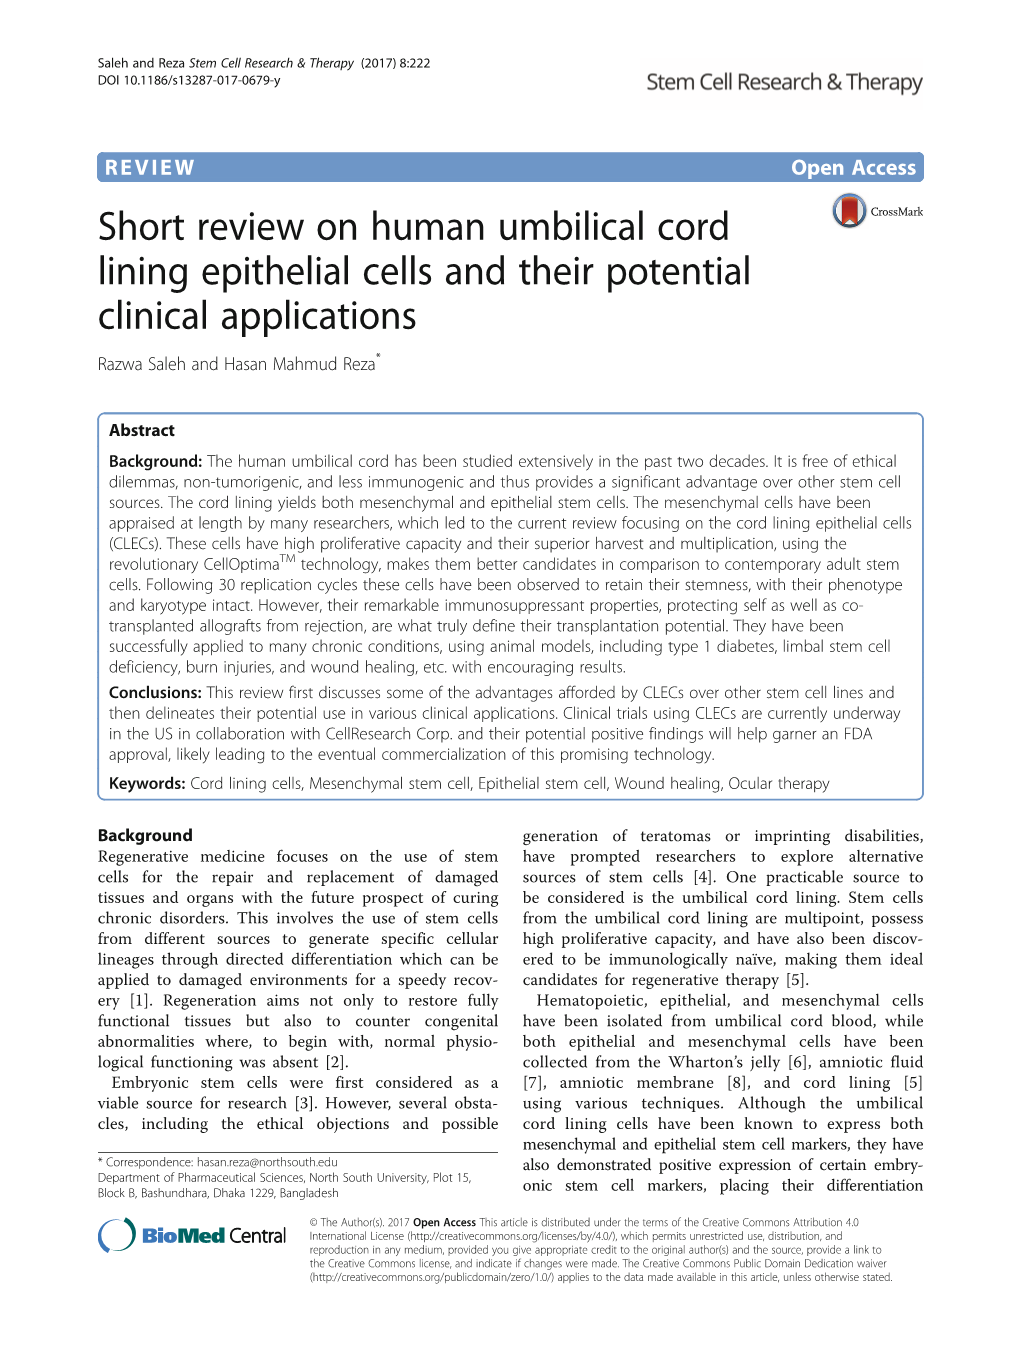 Short Review on Human Umbilical Cord Lining Epithelial Cells and Their Potential Clinical Applications Razwa Saleh and Hasan Mahmud Reza*